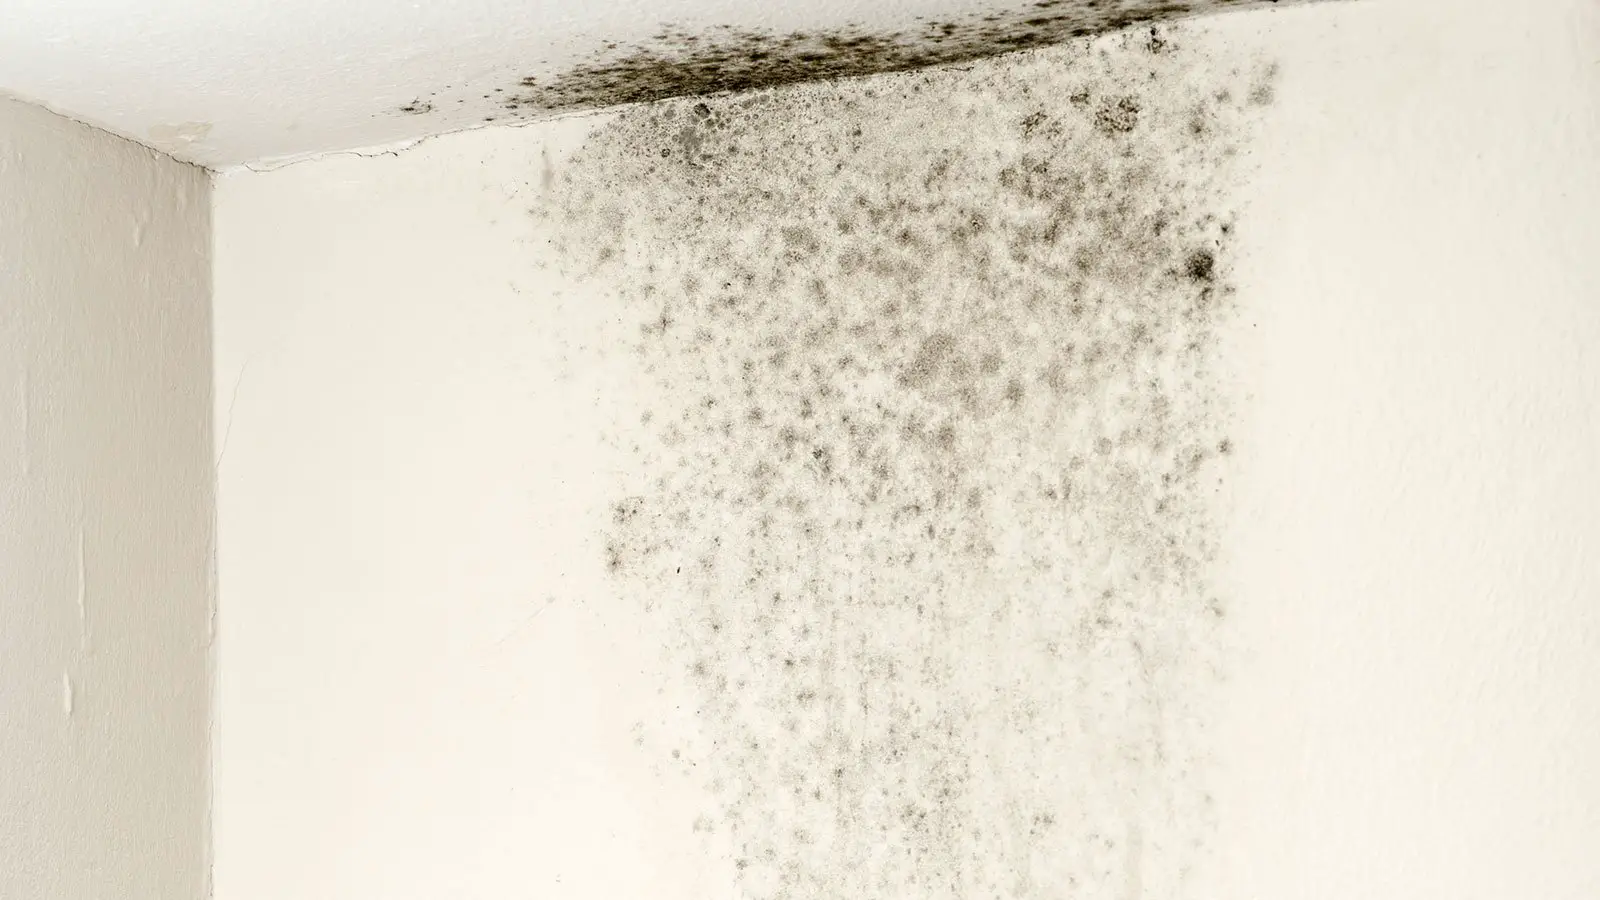 How Long Does It Take For Black Mold To Grow On Drywall / How Long Does ...